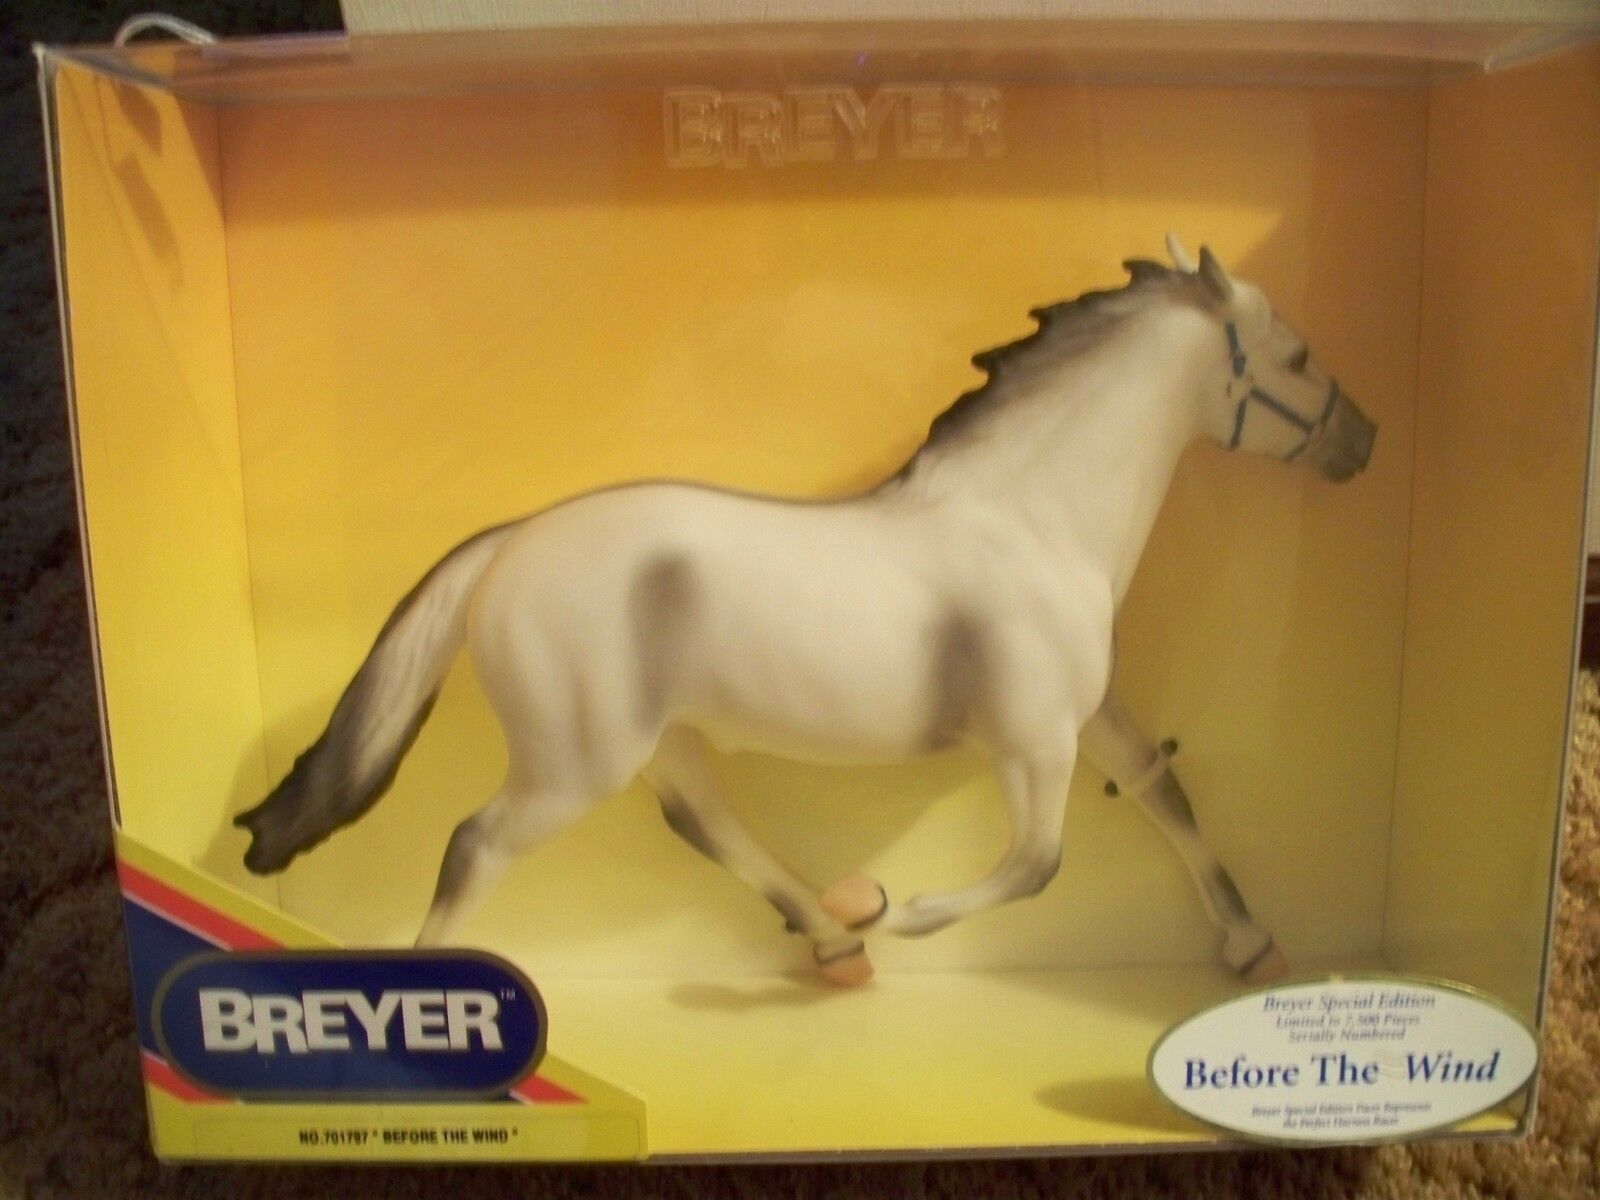 BREYER SR SPECIAL RUN 1997 TOYS R US BEFORE THE WIND STANDARDBRED PACER HORSE 